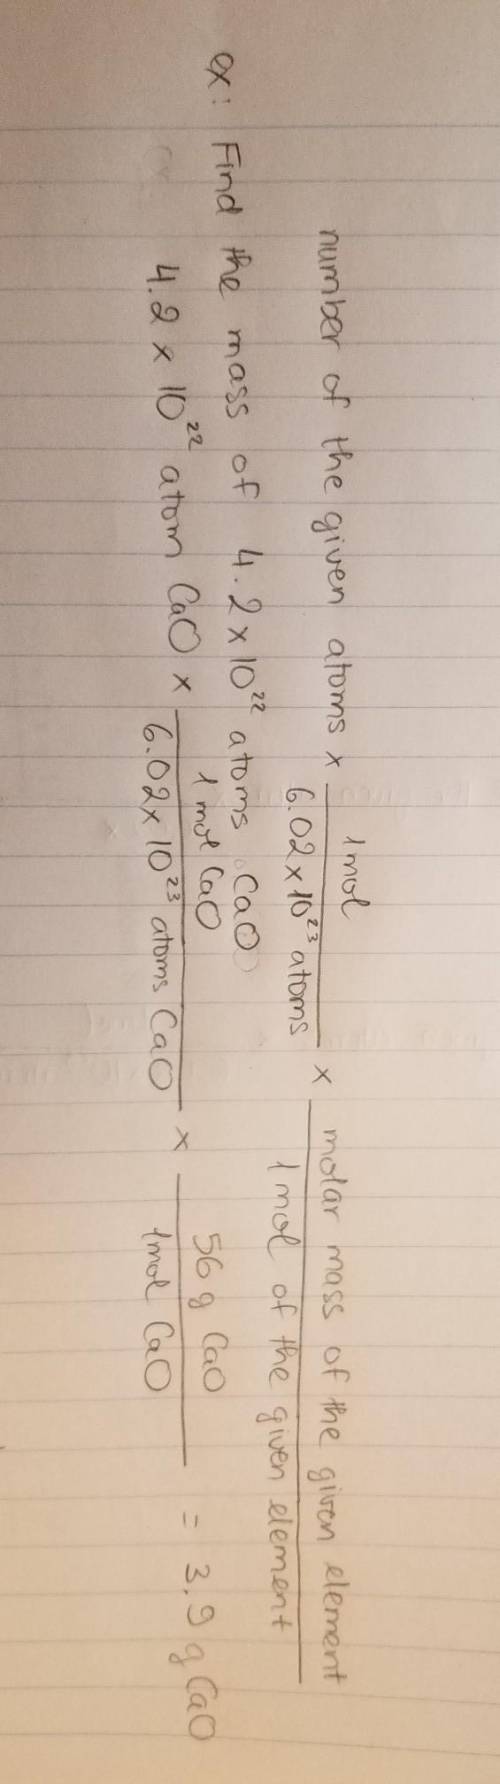 List the steps needed to convert the number of atoms to the mass of an element